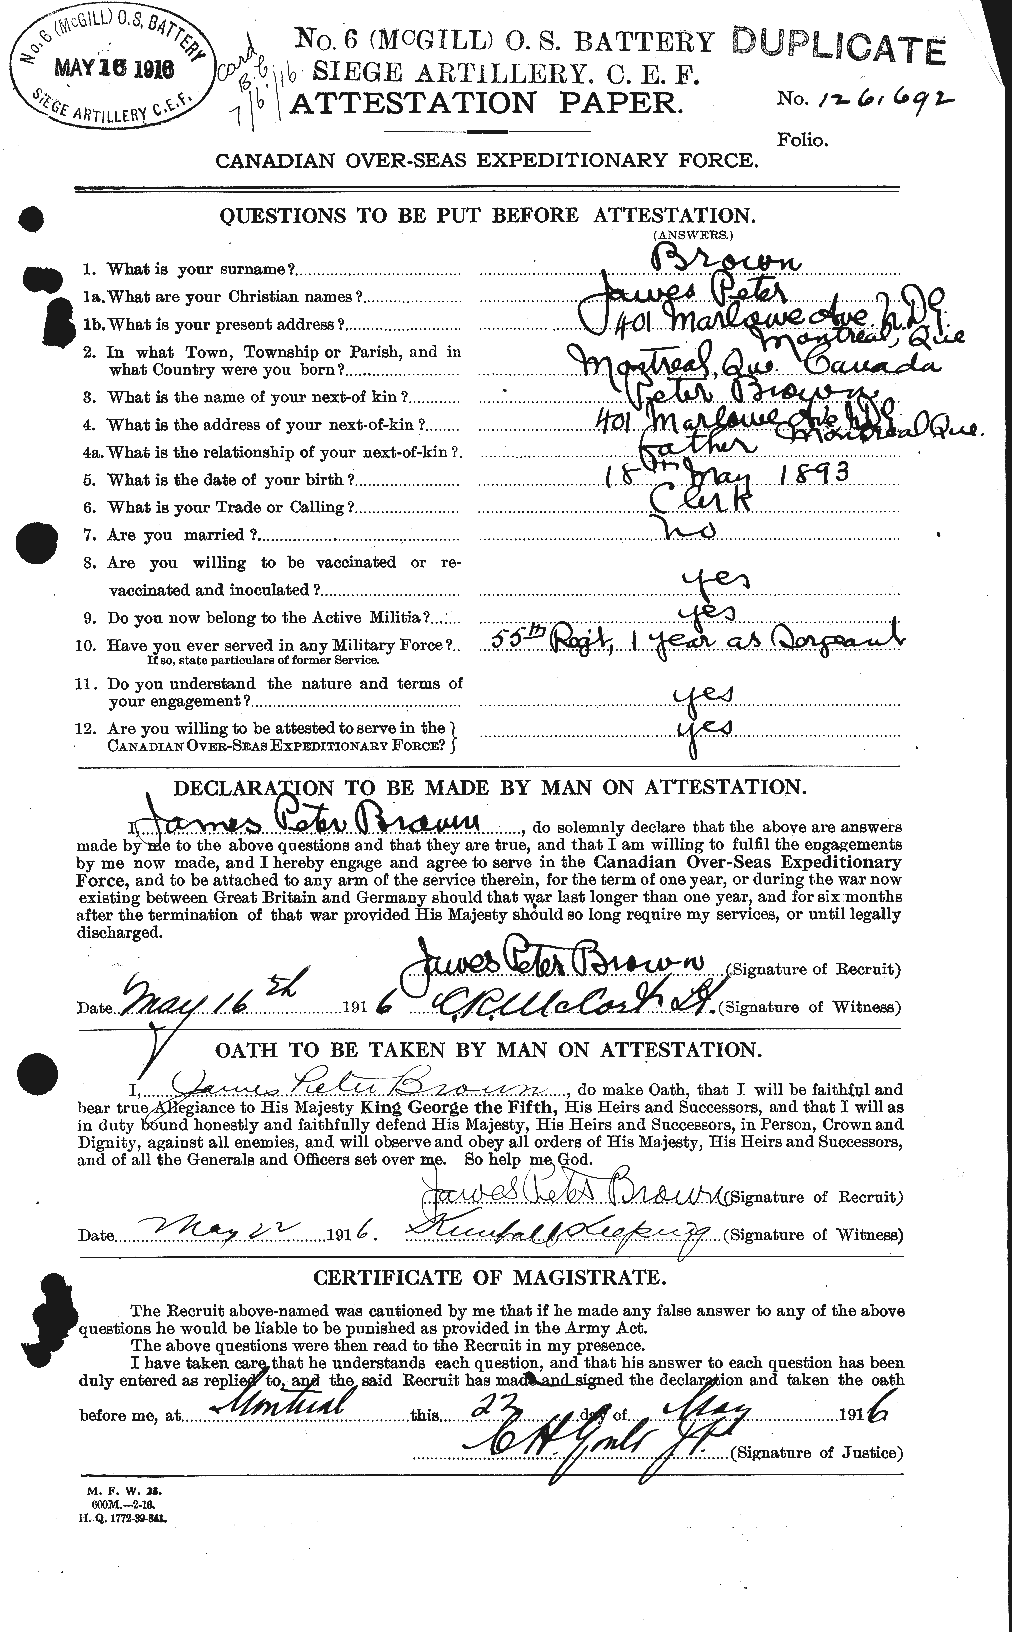 Personnel Records of the First World War - CEF 269568a